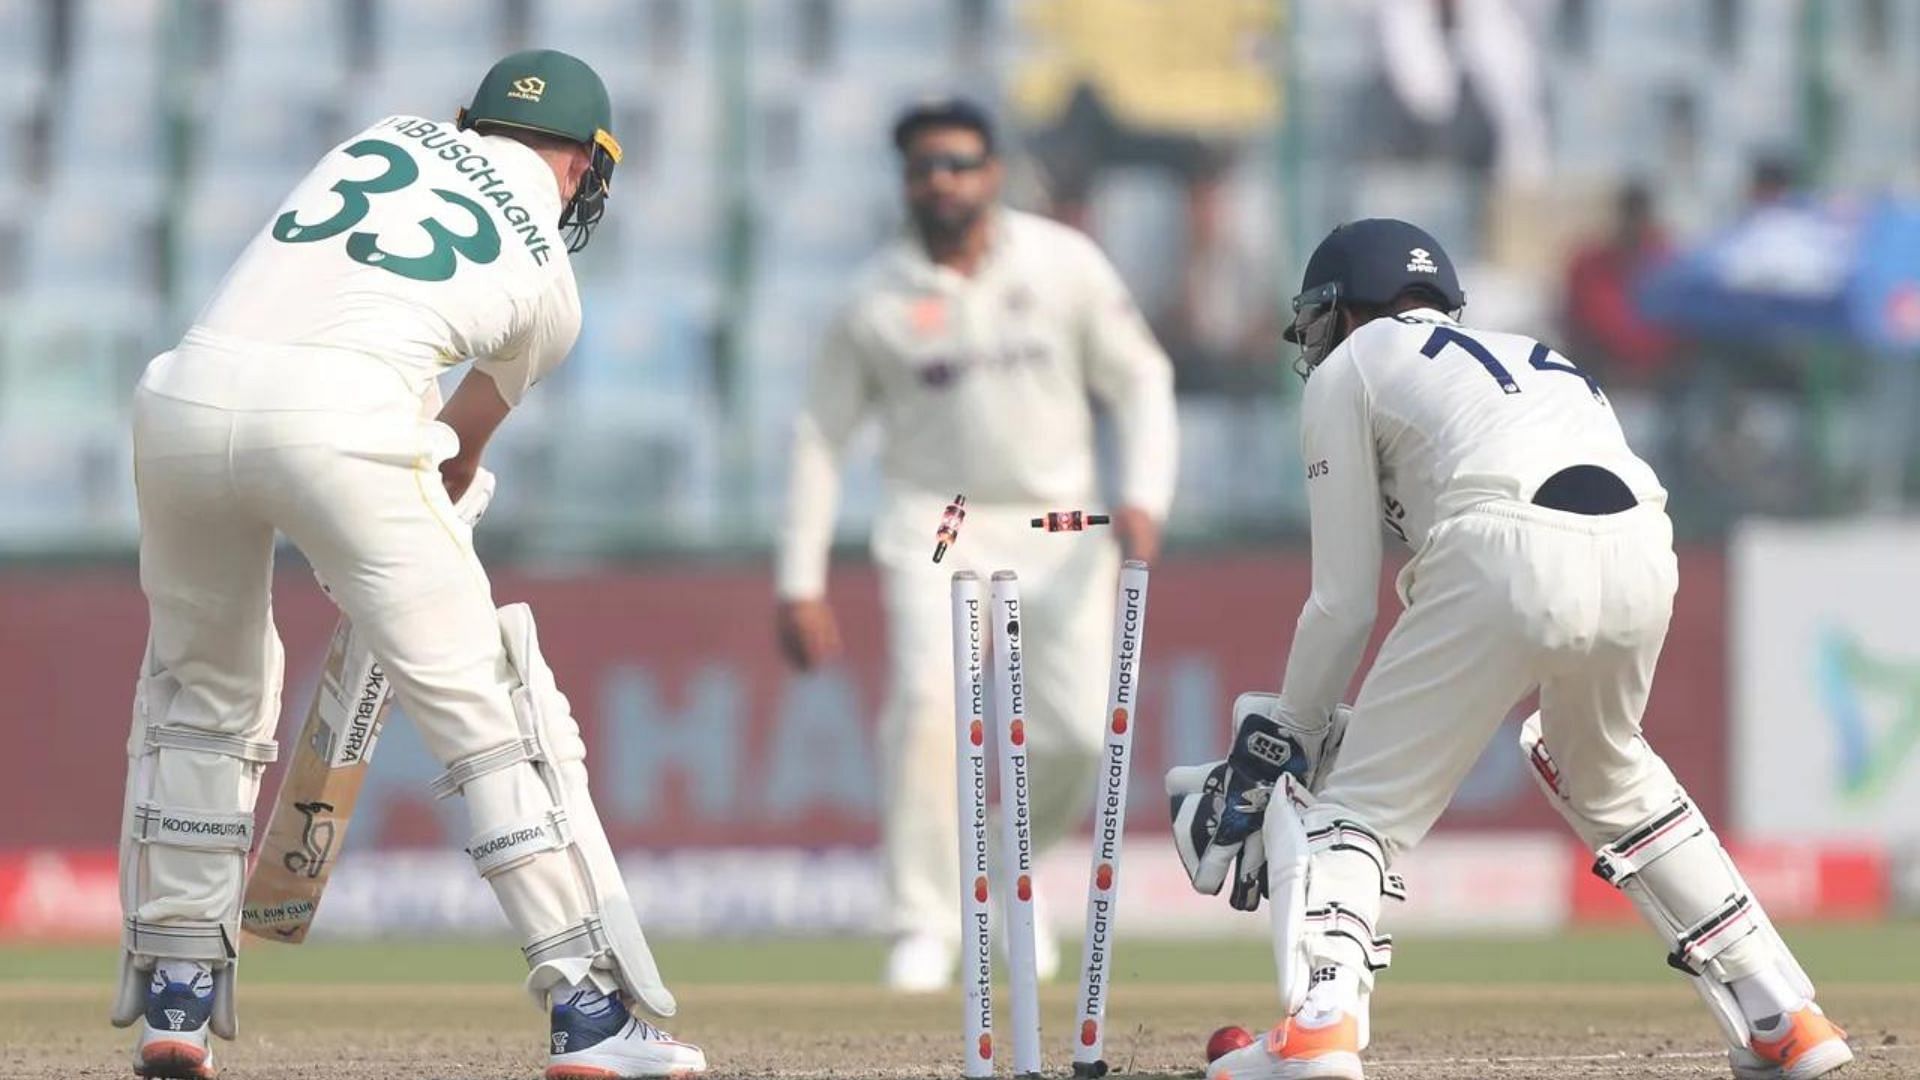 Marnus Labuschagne tried to play a fuller delivery on the back-foot and got cleaned up by Jadeja. (P.C.:BCCI)